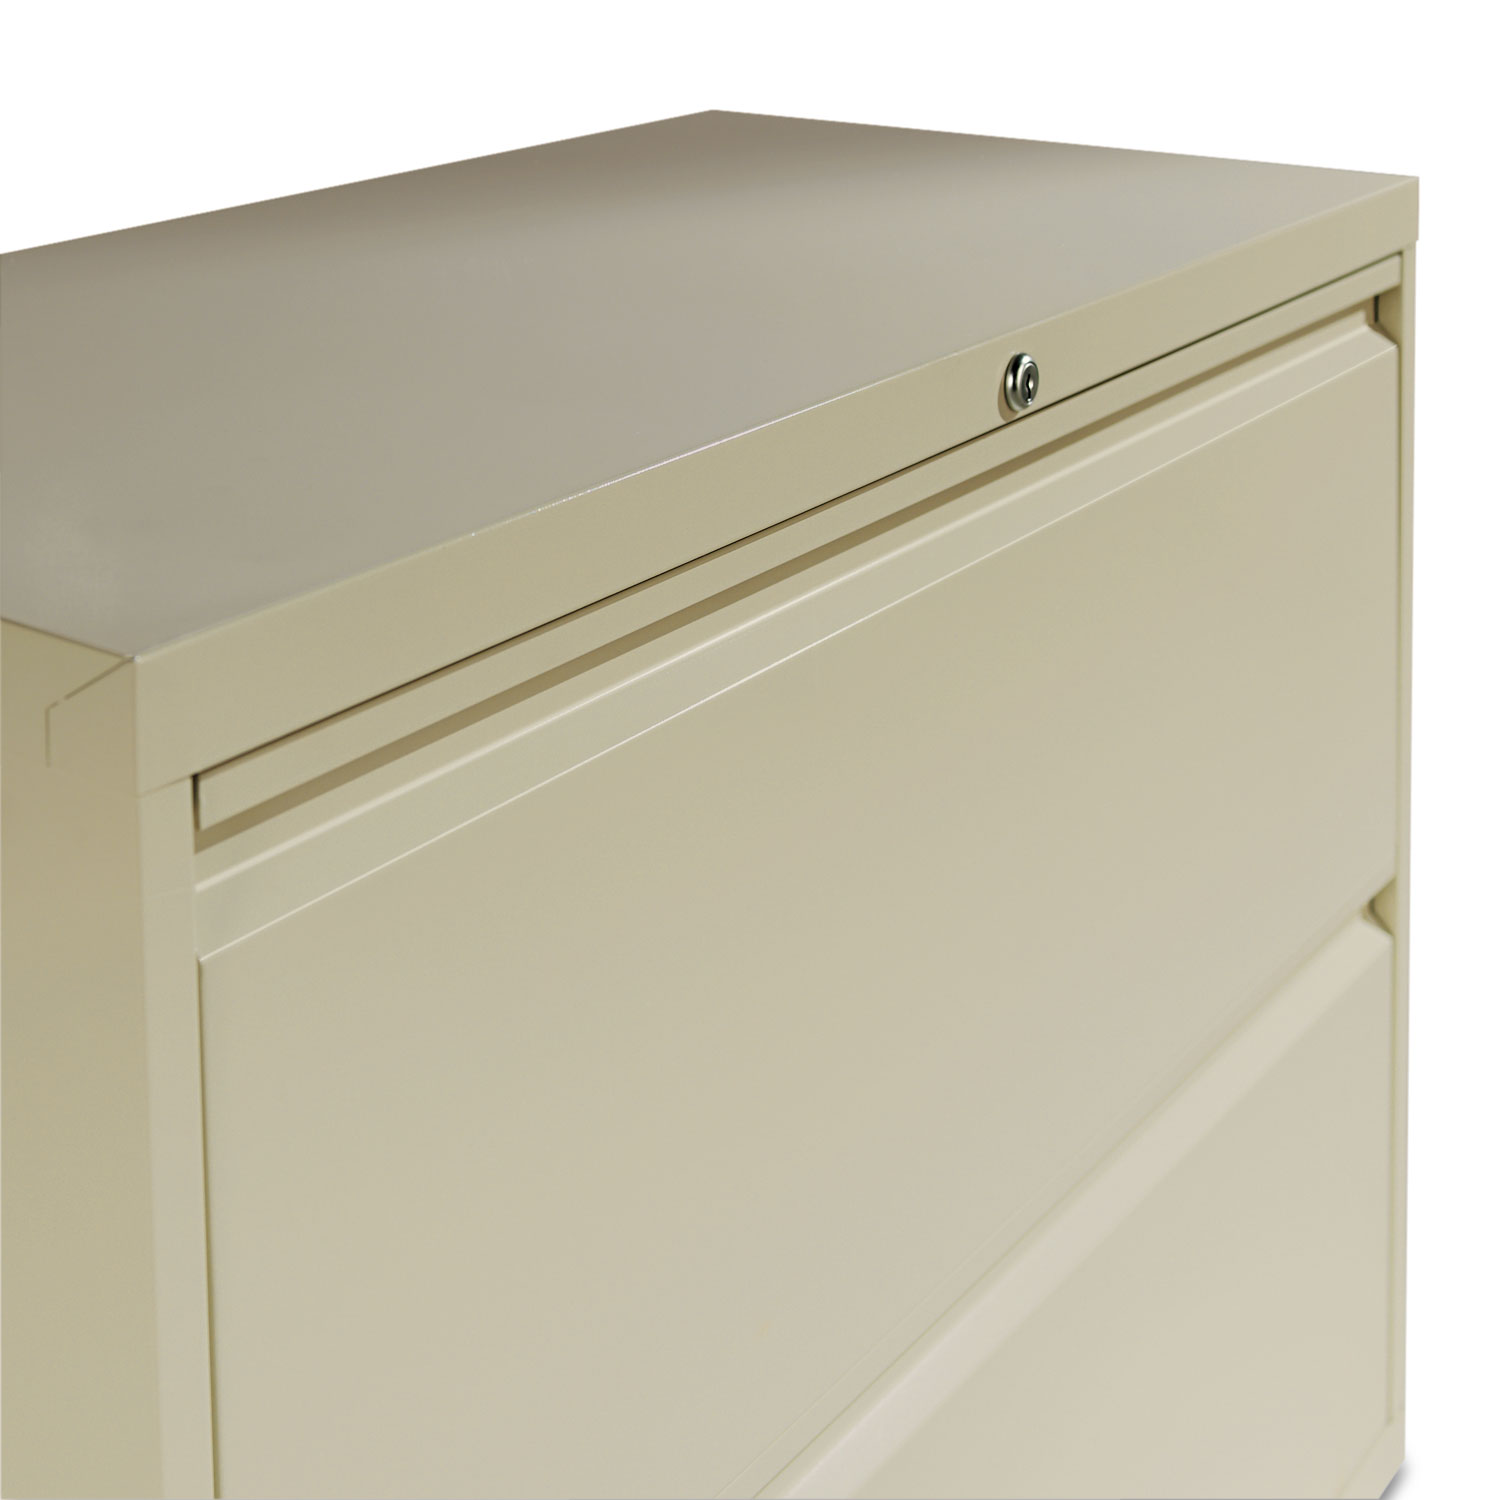 Four-Drawer Lateral File Cabinet, 36w x 19-1/4d x 53-1/4h, Putty